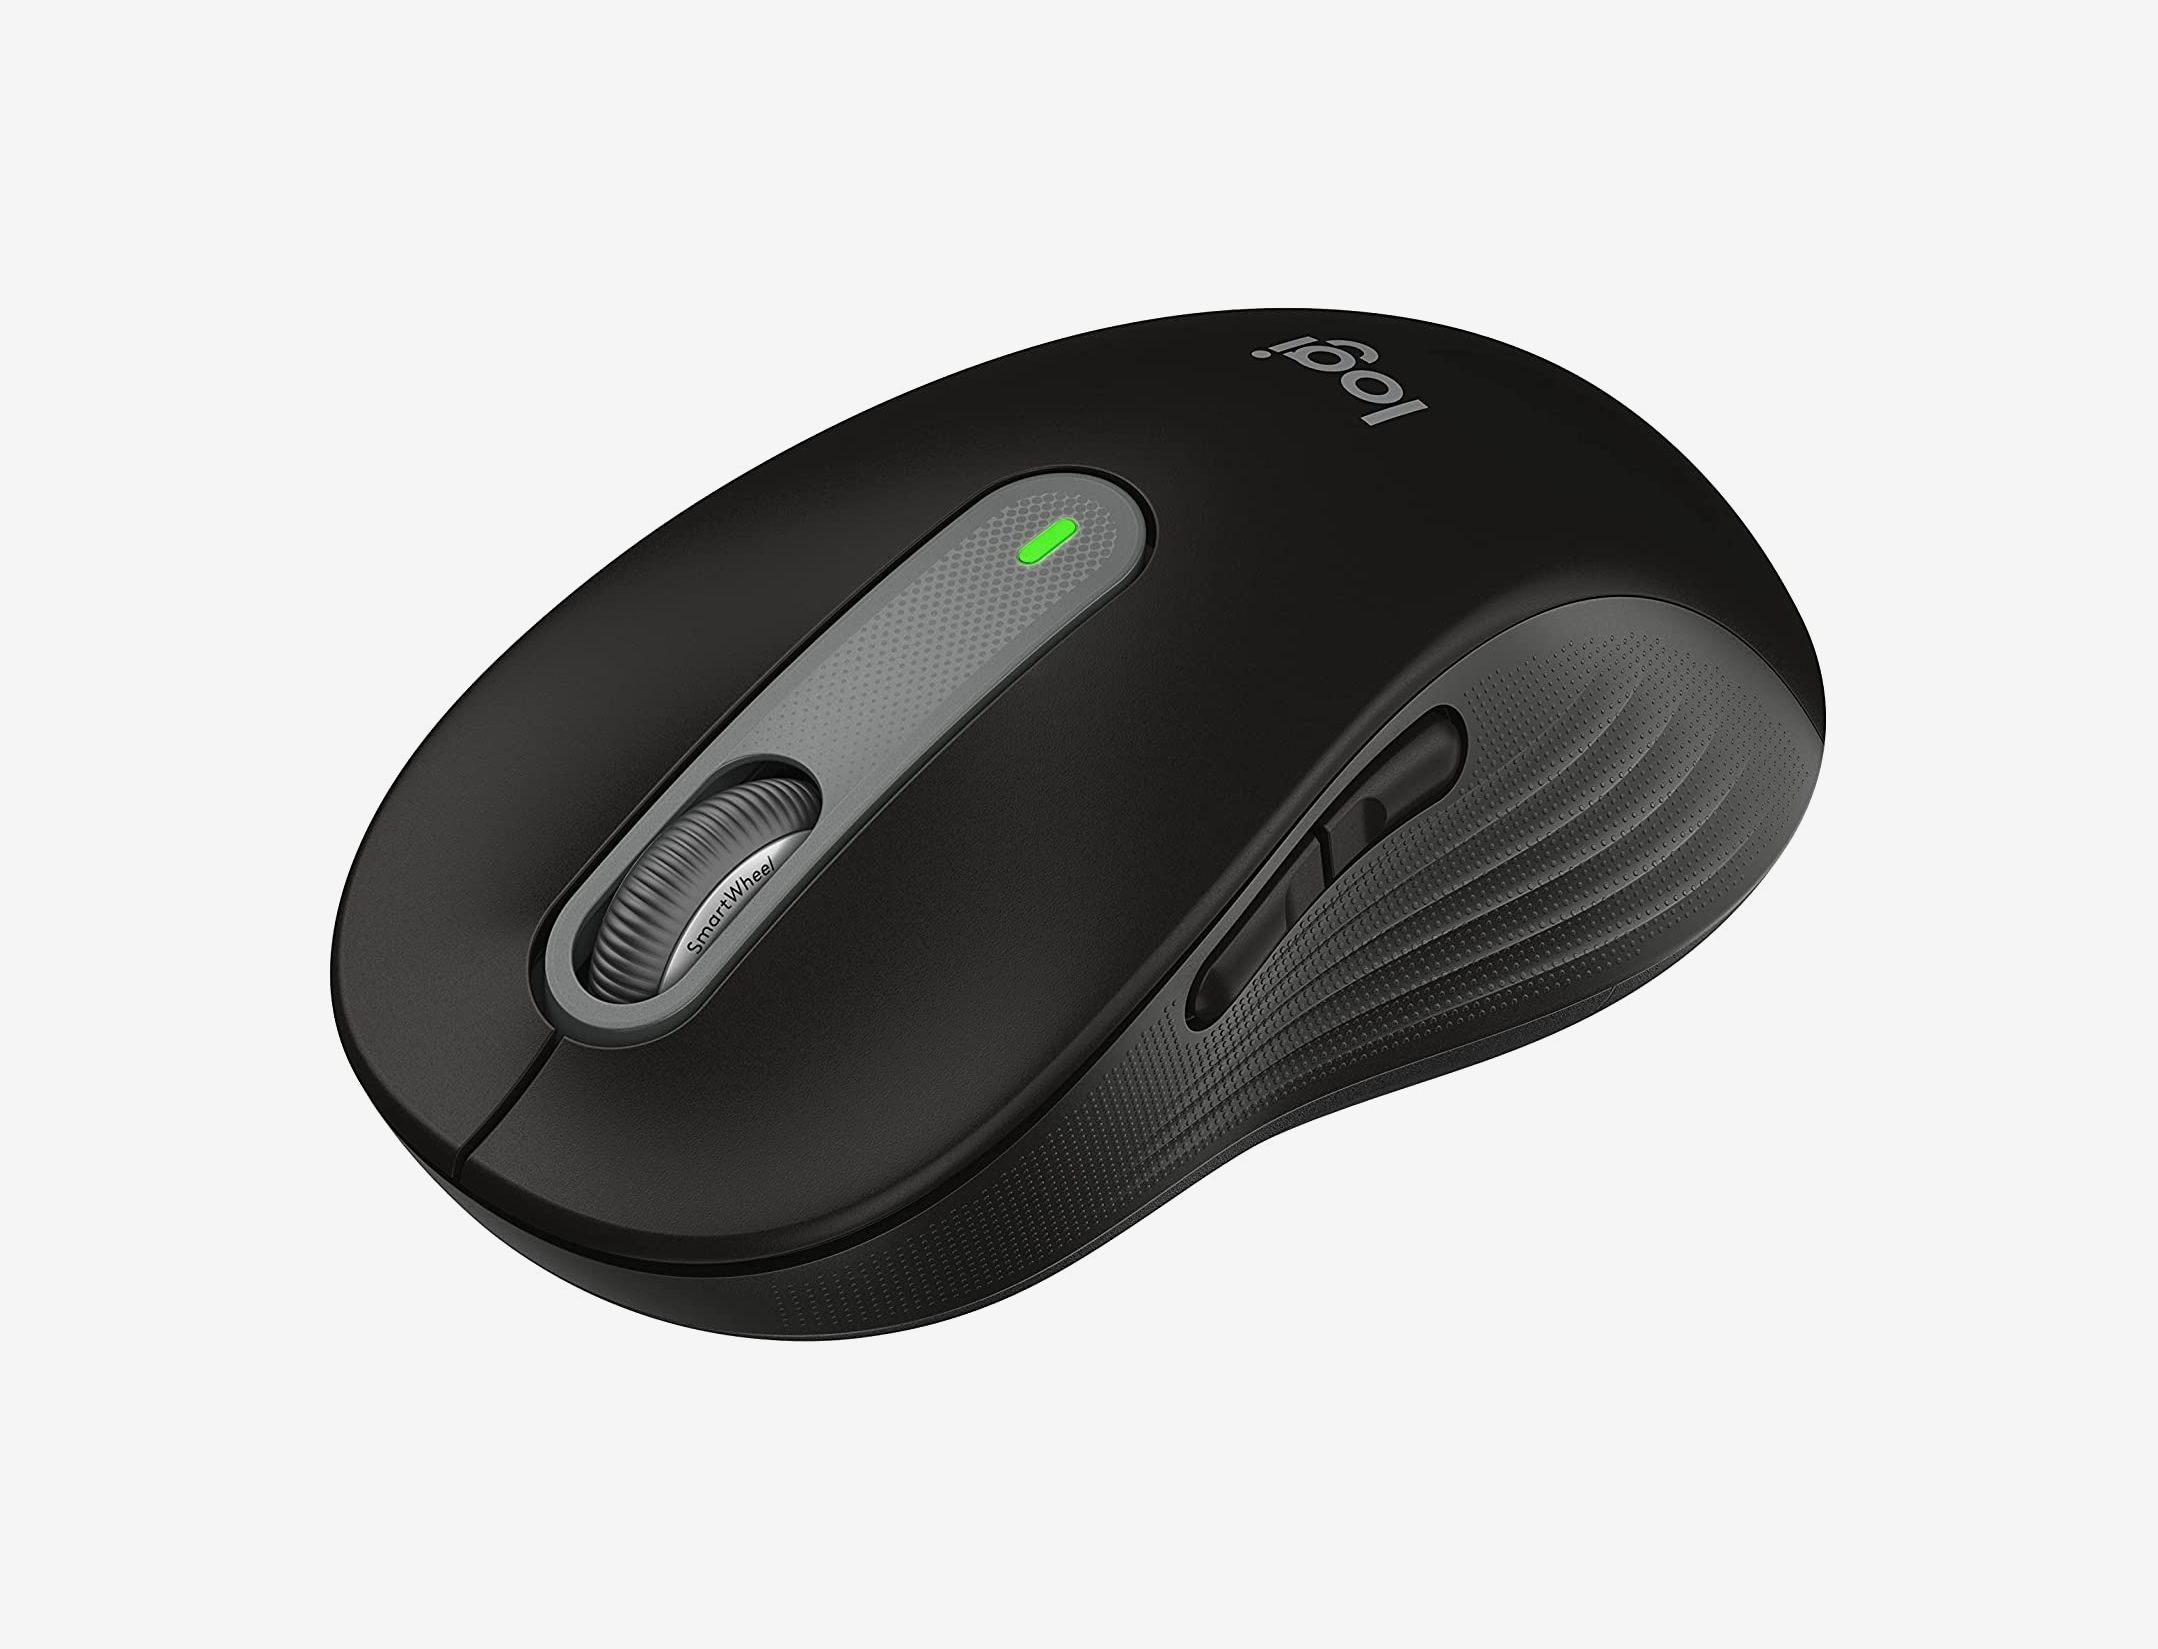 Mouse per computer - Mouse wireless, Bluetooth, cablati